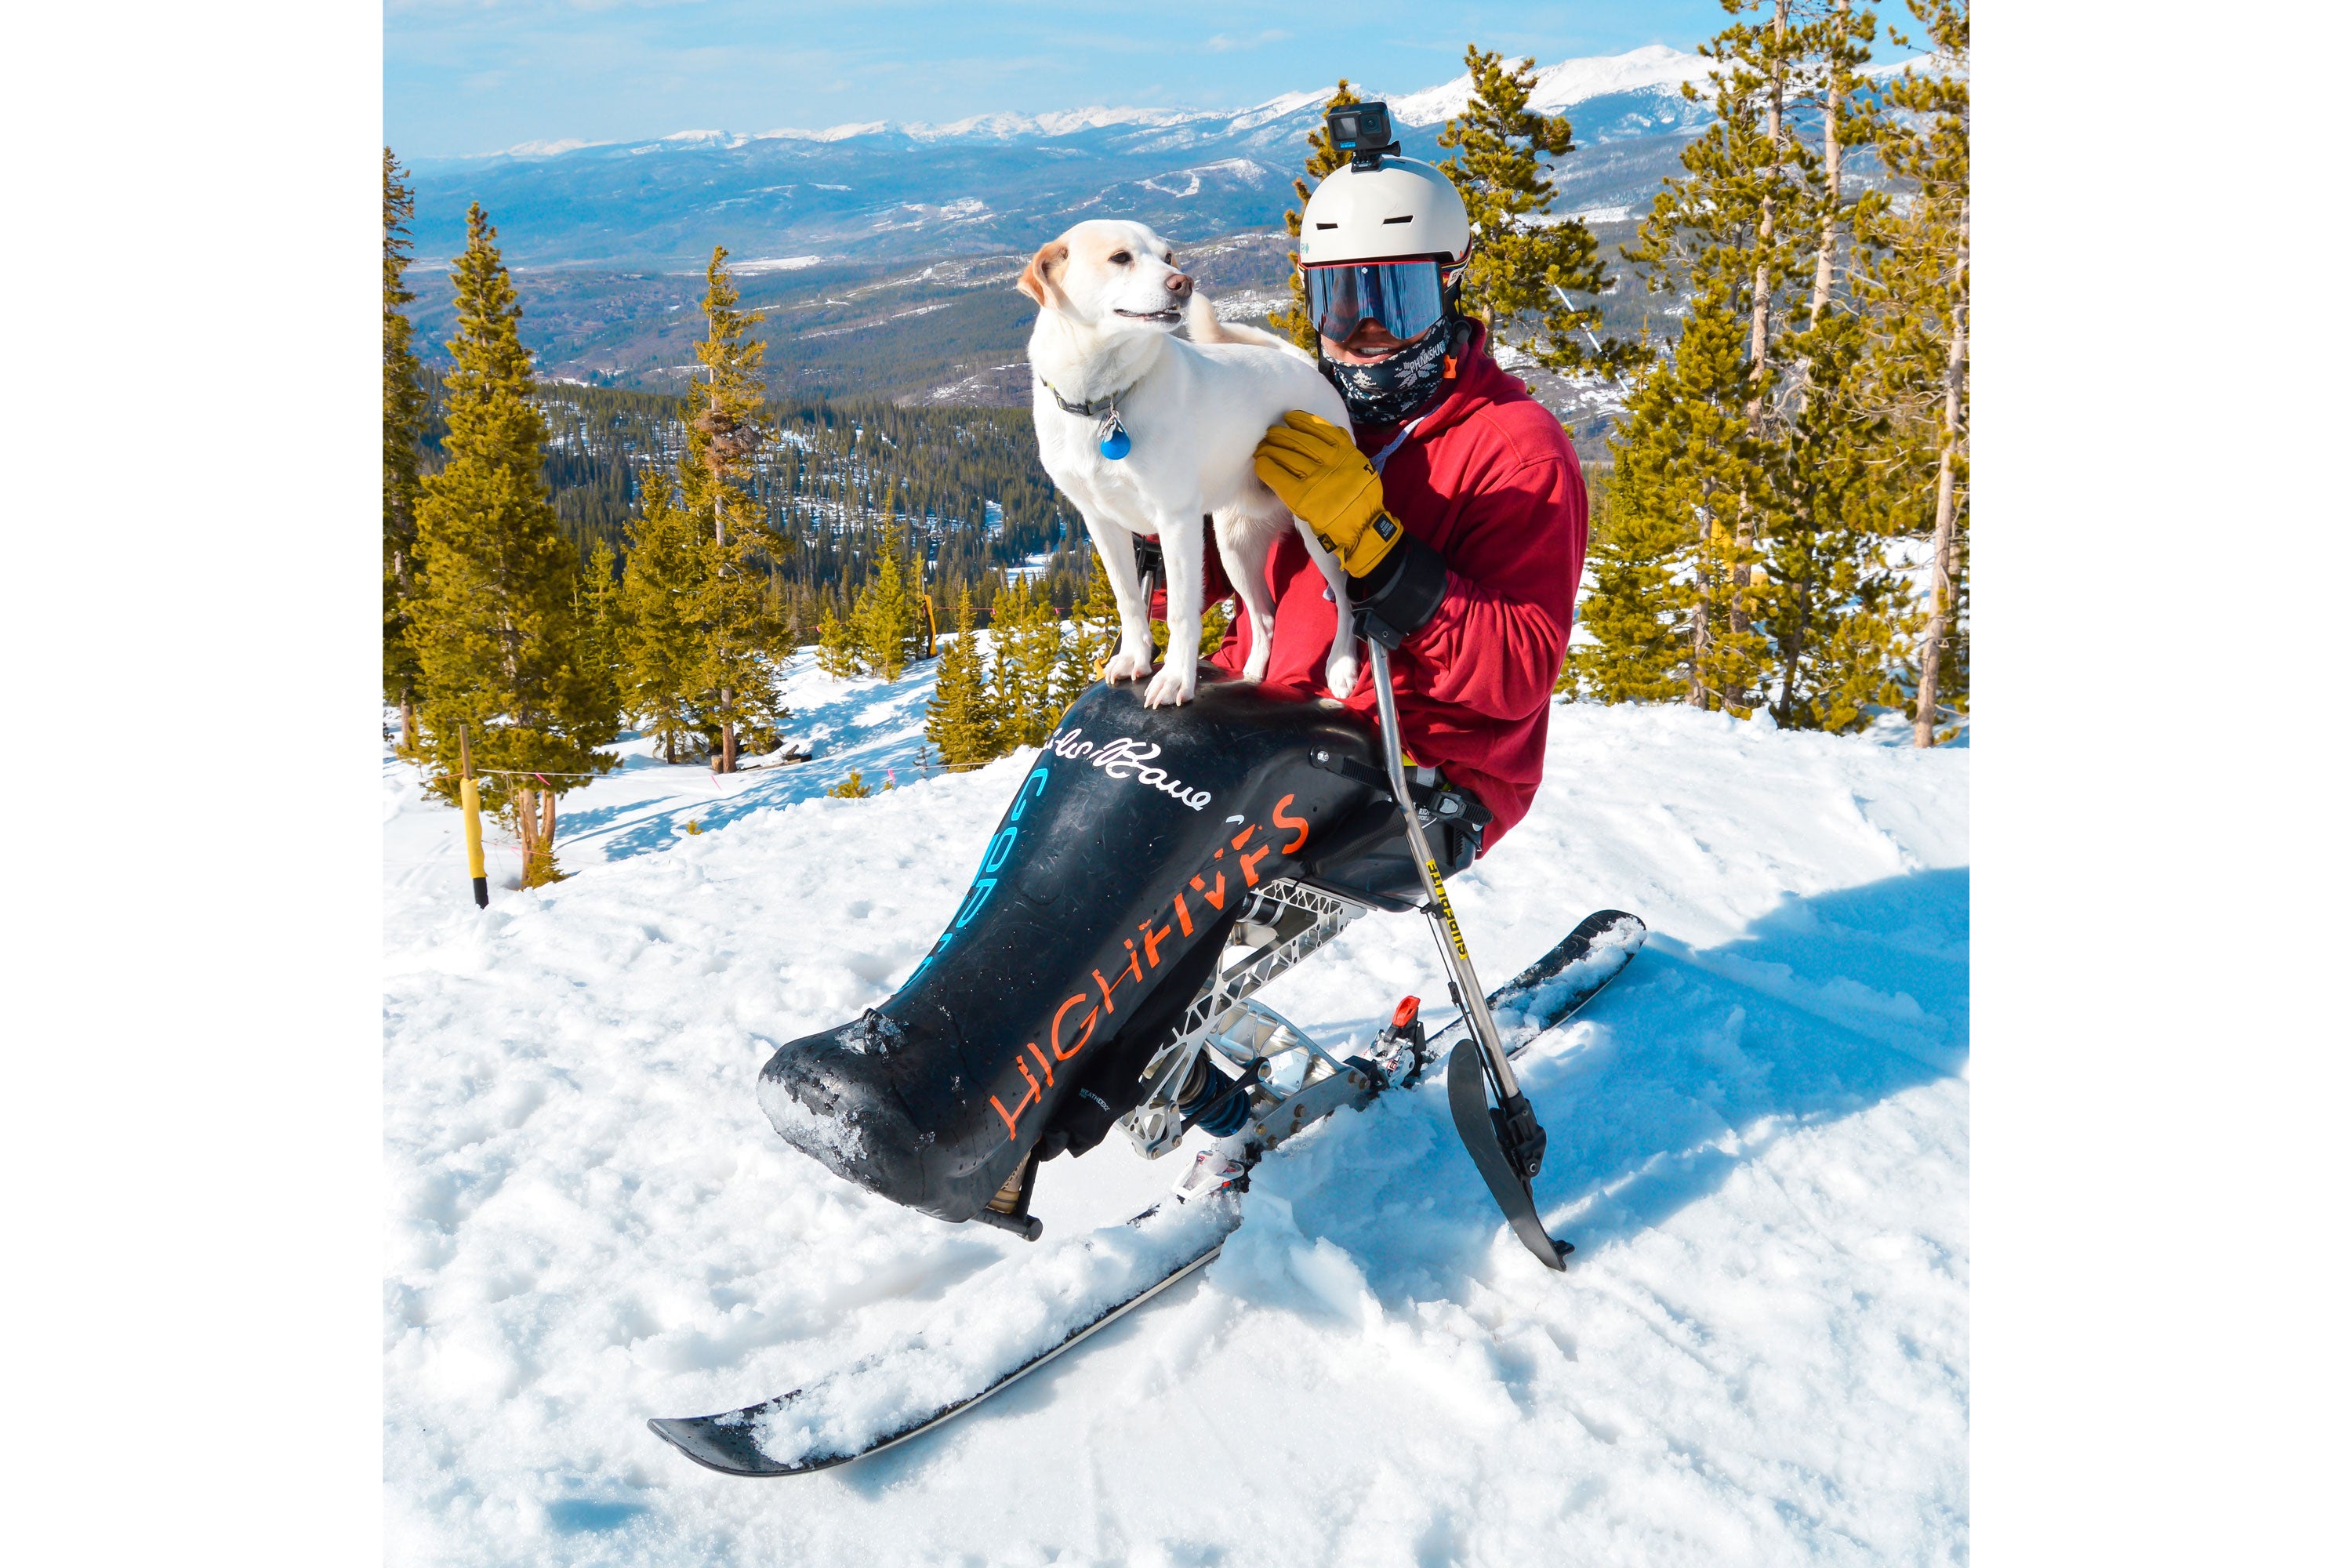 Trevor Kennison dressed in ski gear, with a go pro camera on his hemet and holding a Labrador dog. Snowy mountain scene with pine trees behind and below him